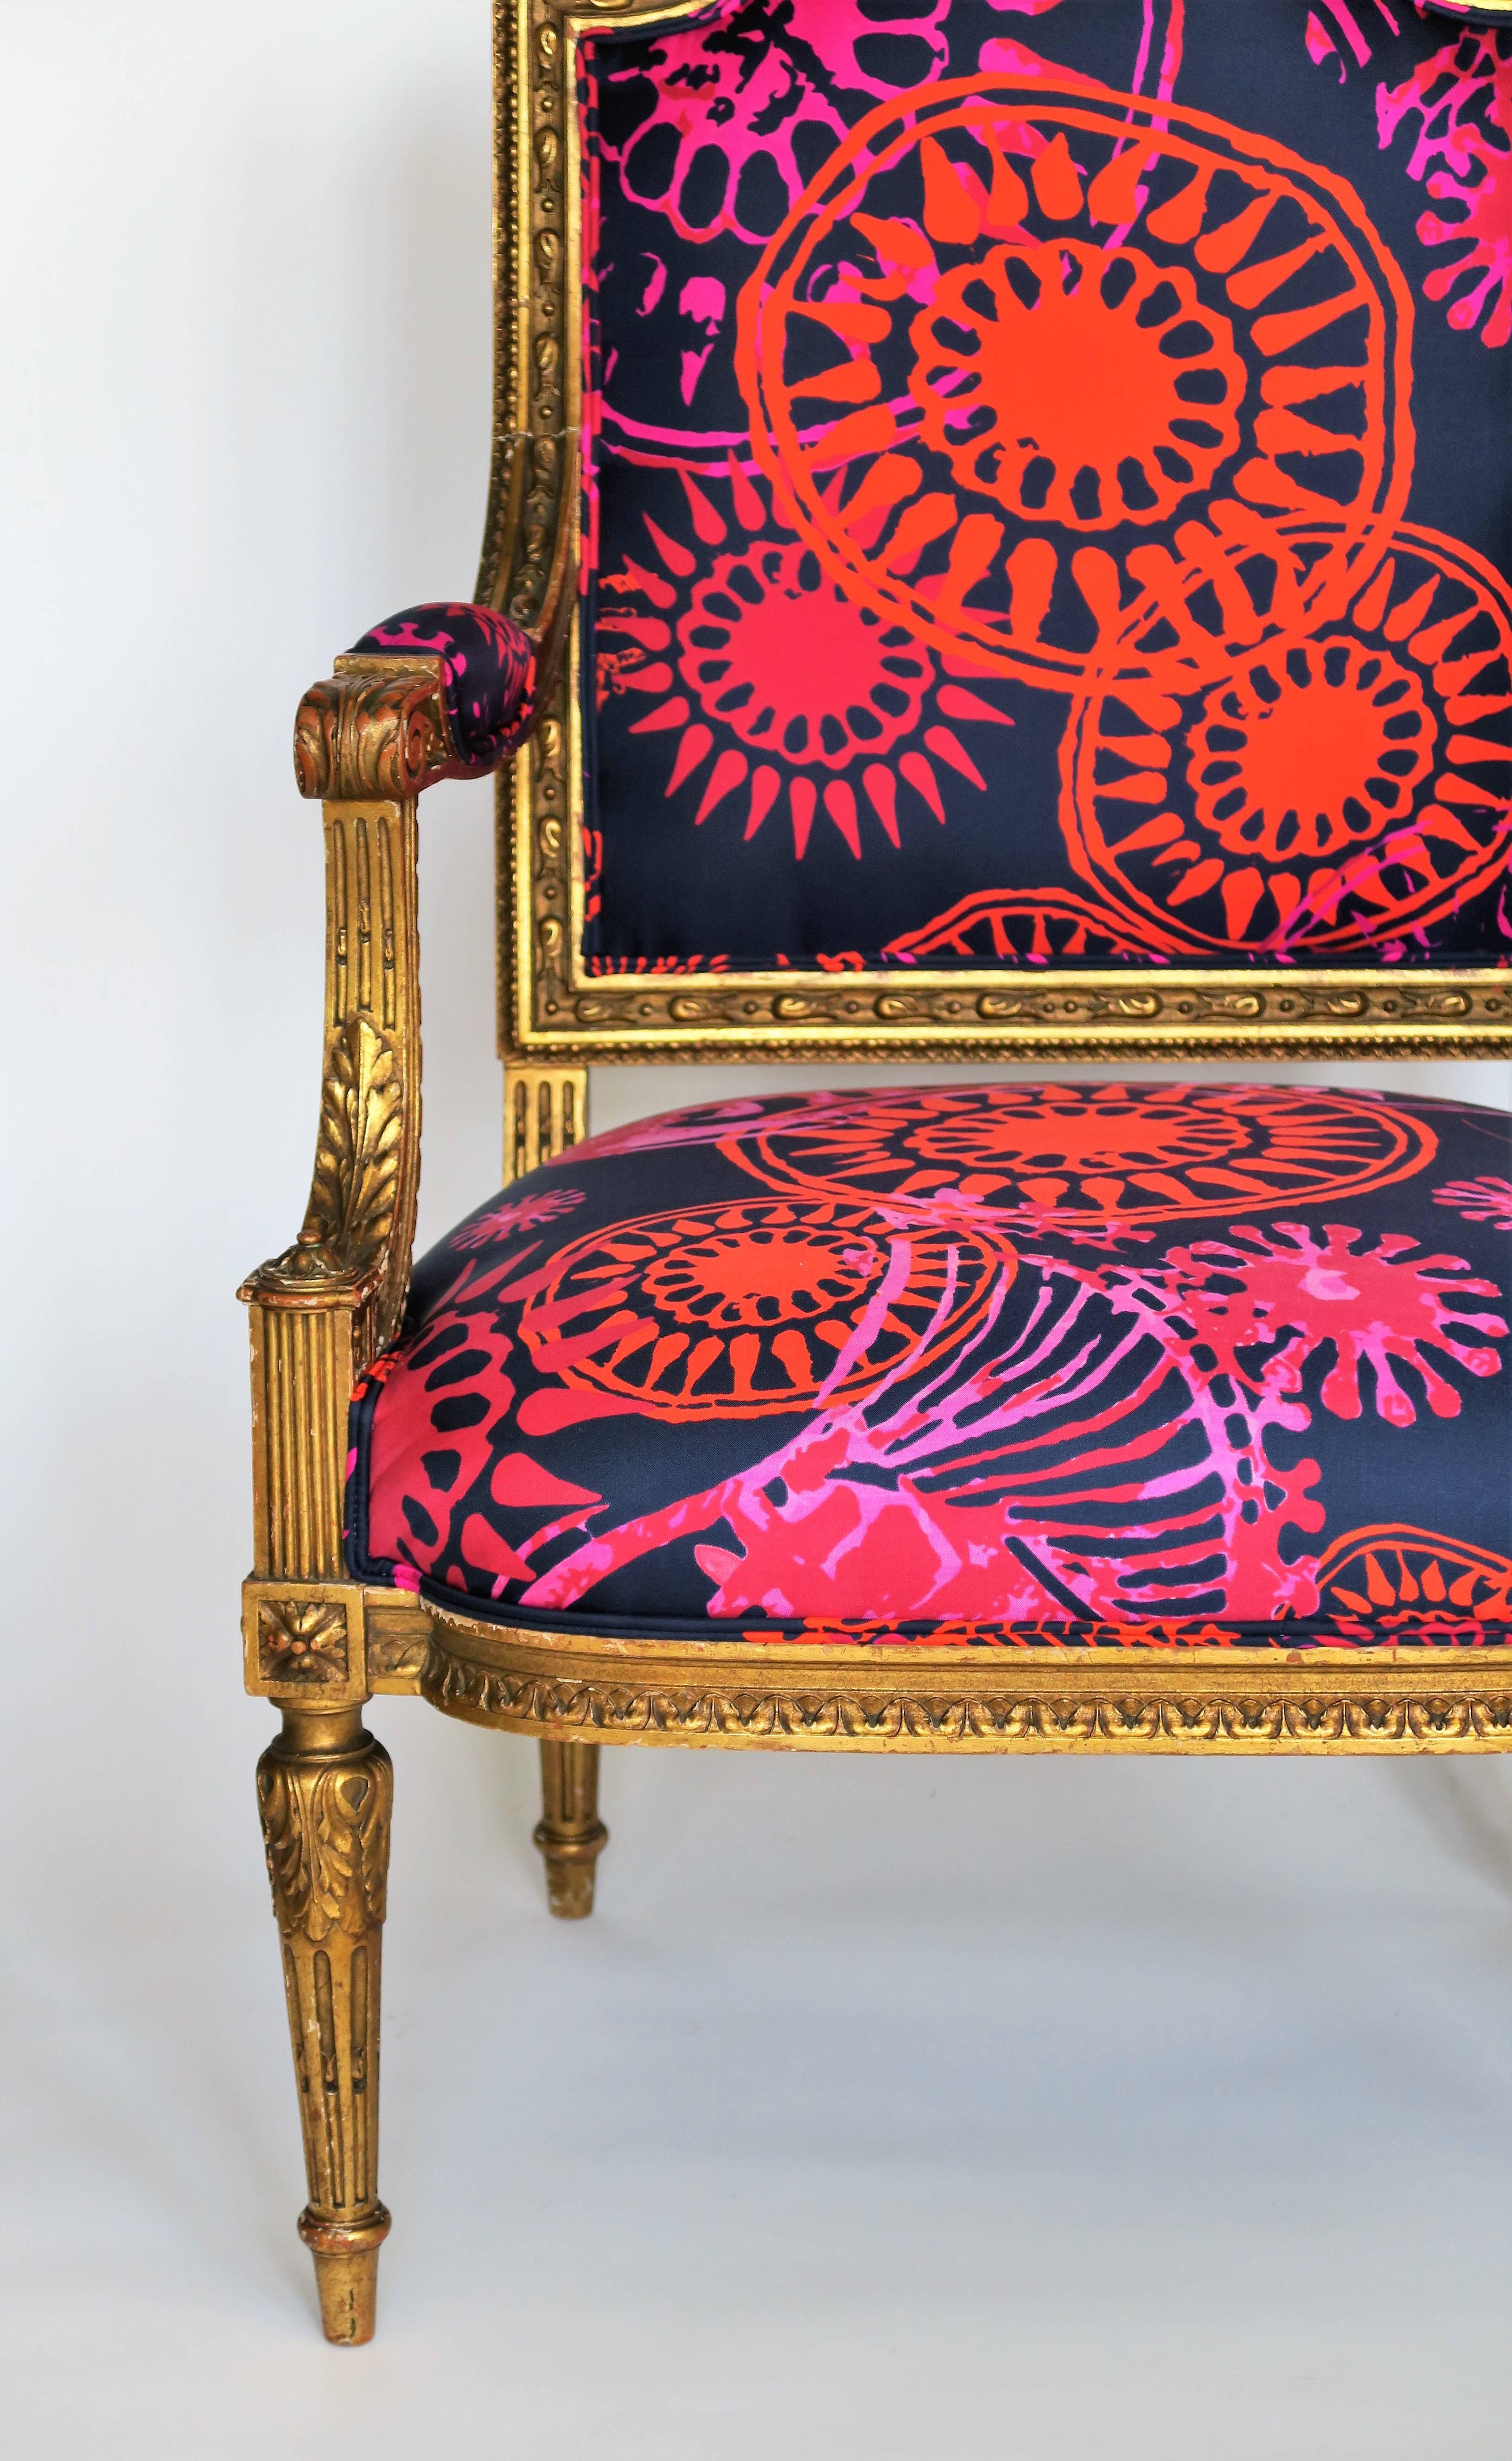 Breathtaking restoration of one gilded (gold) and hand-carved, late 19th century Louis XVI style armchair. The frame is original and shows beautiful gilded patina with chips and scratches commensurate with the chair's age and use. Stunning details.